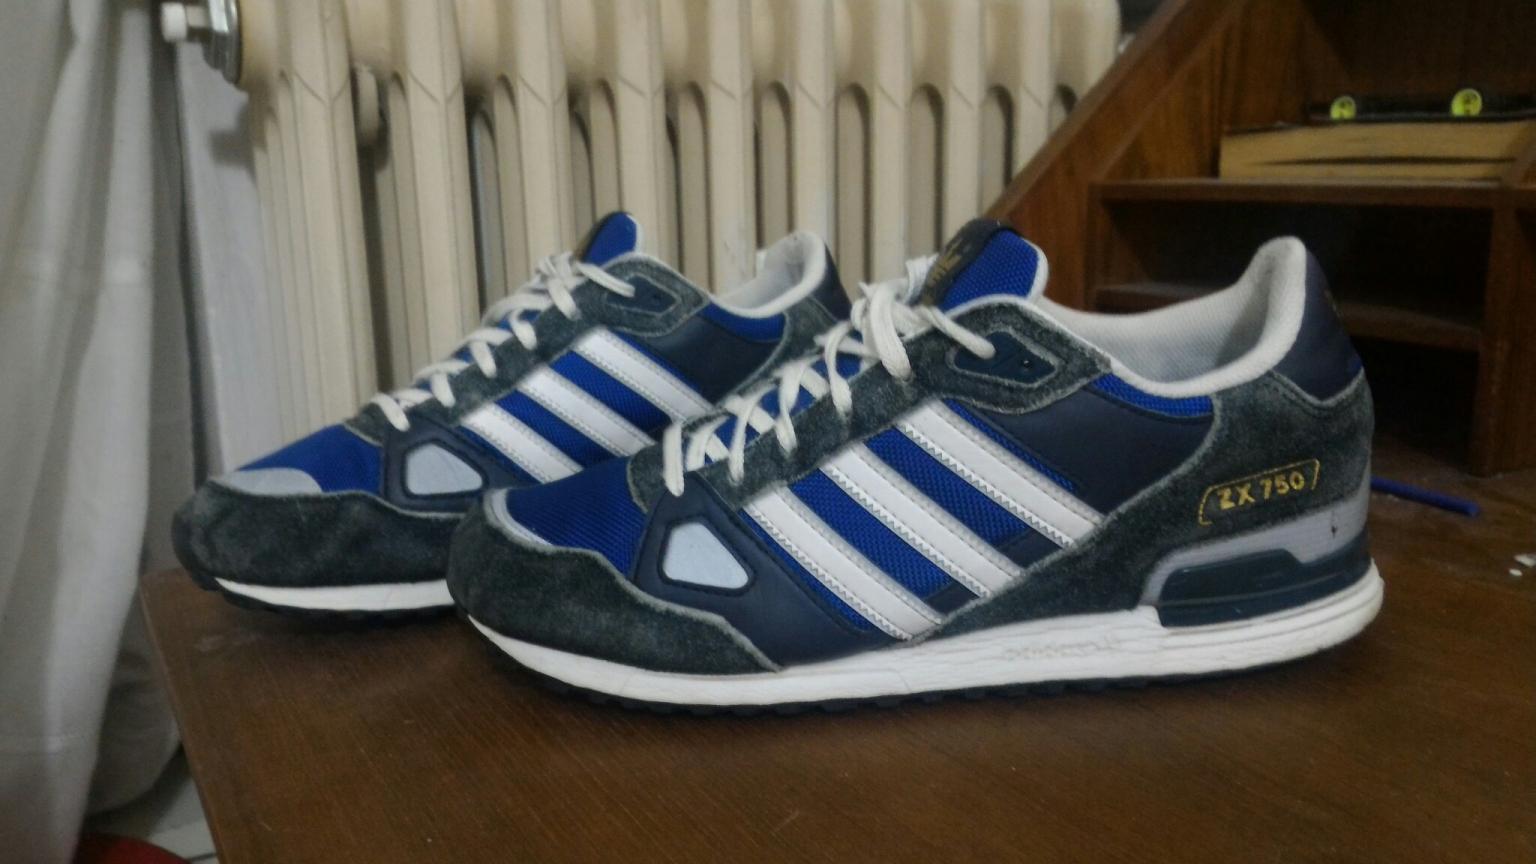 Adidas ZX 750 in 40139 Bologna for €20.00 for sale | Shpock